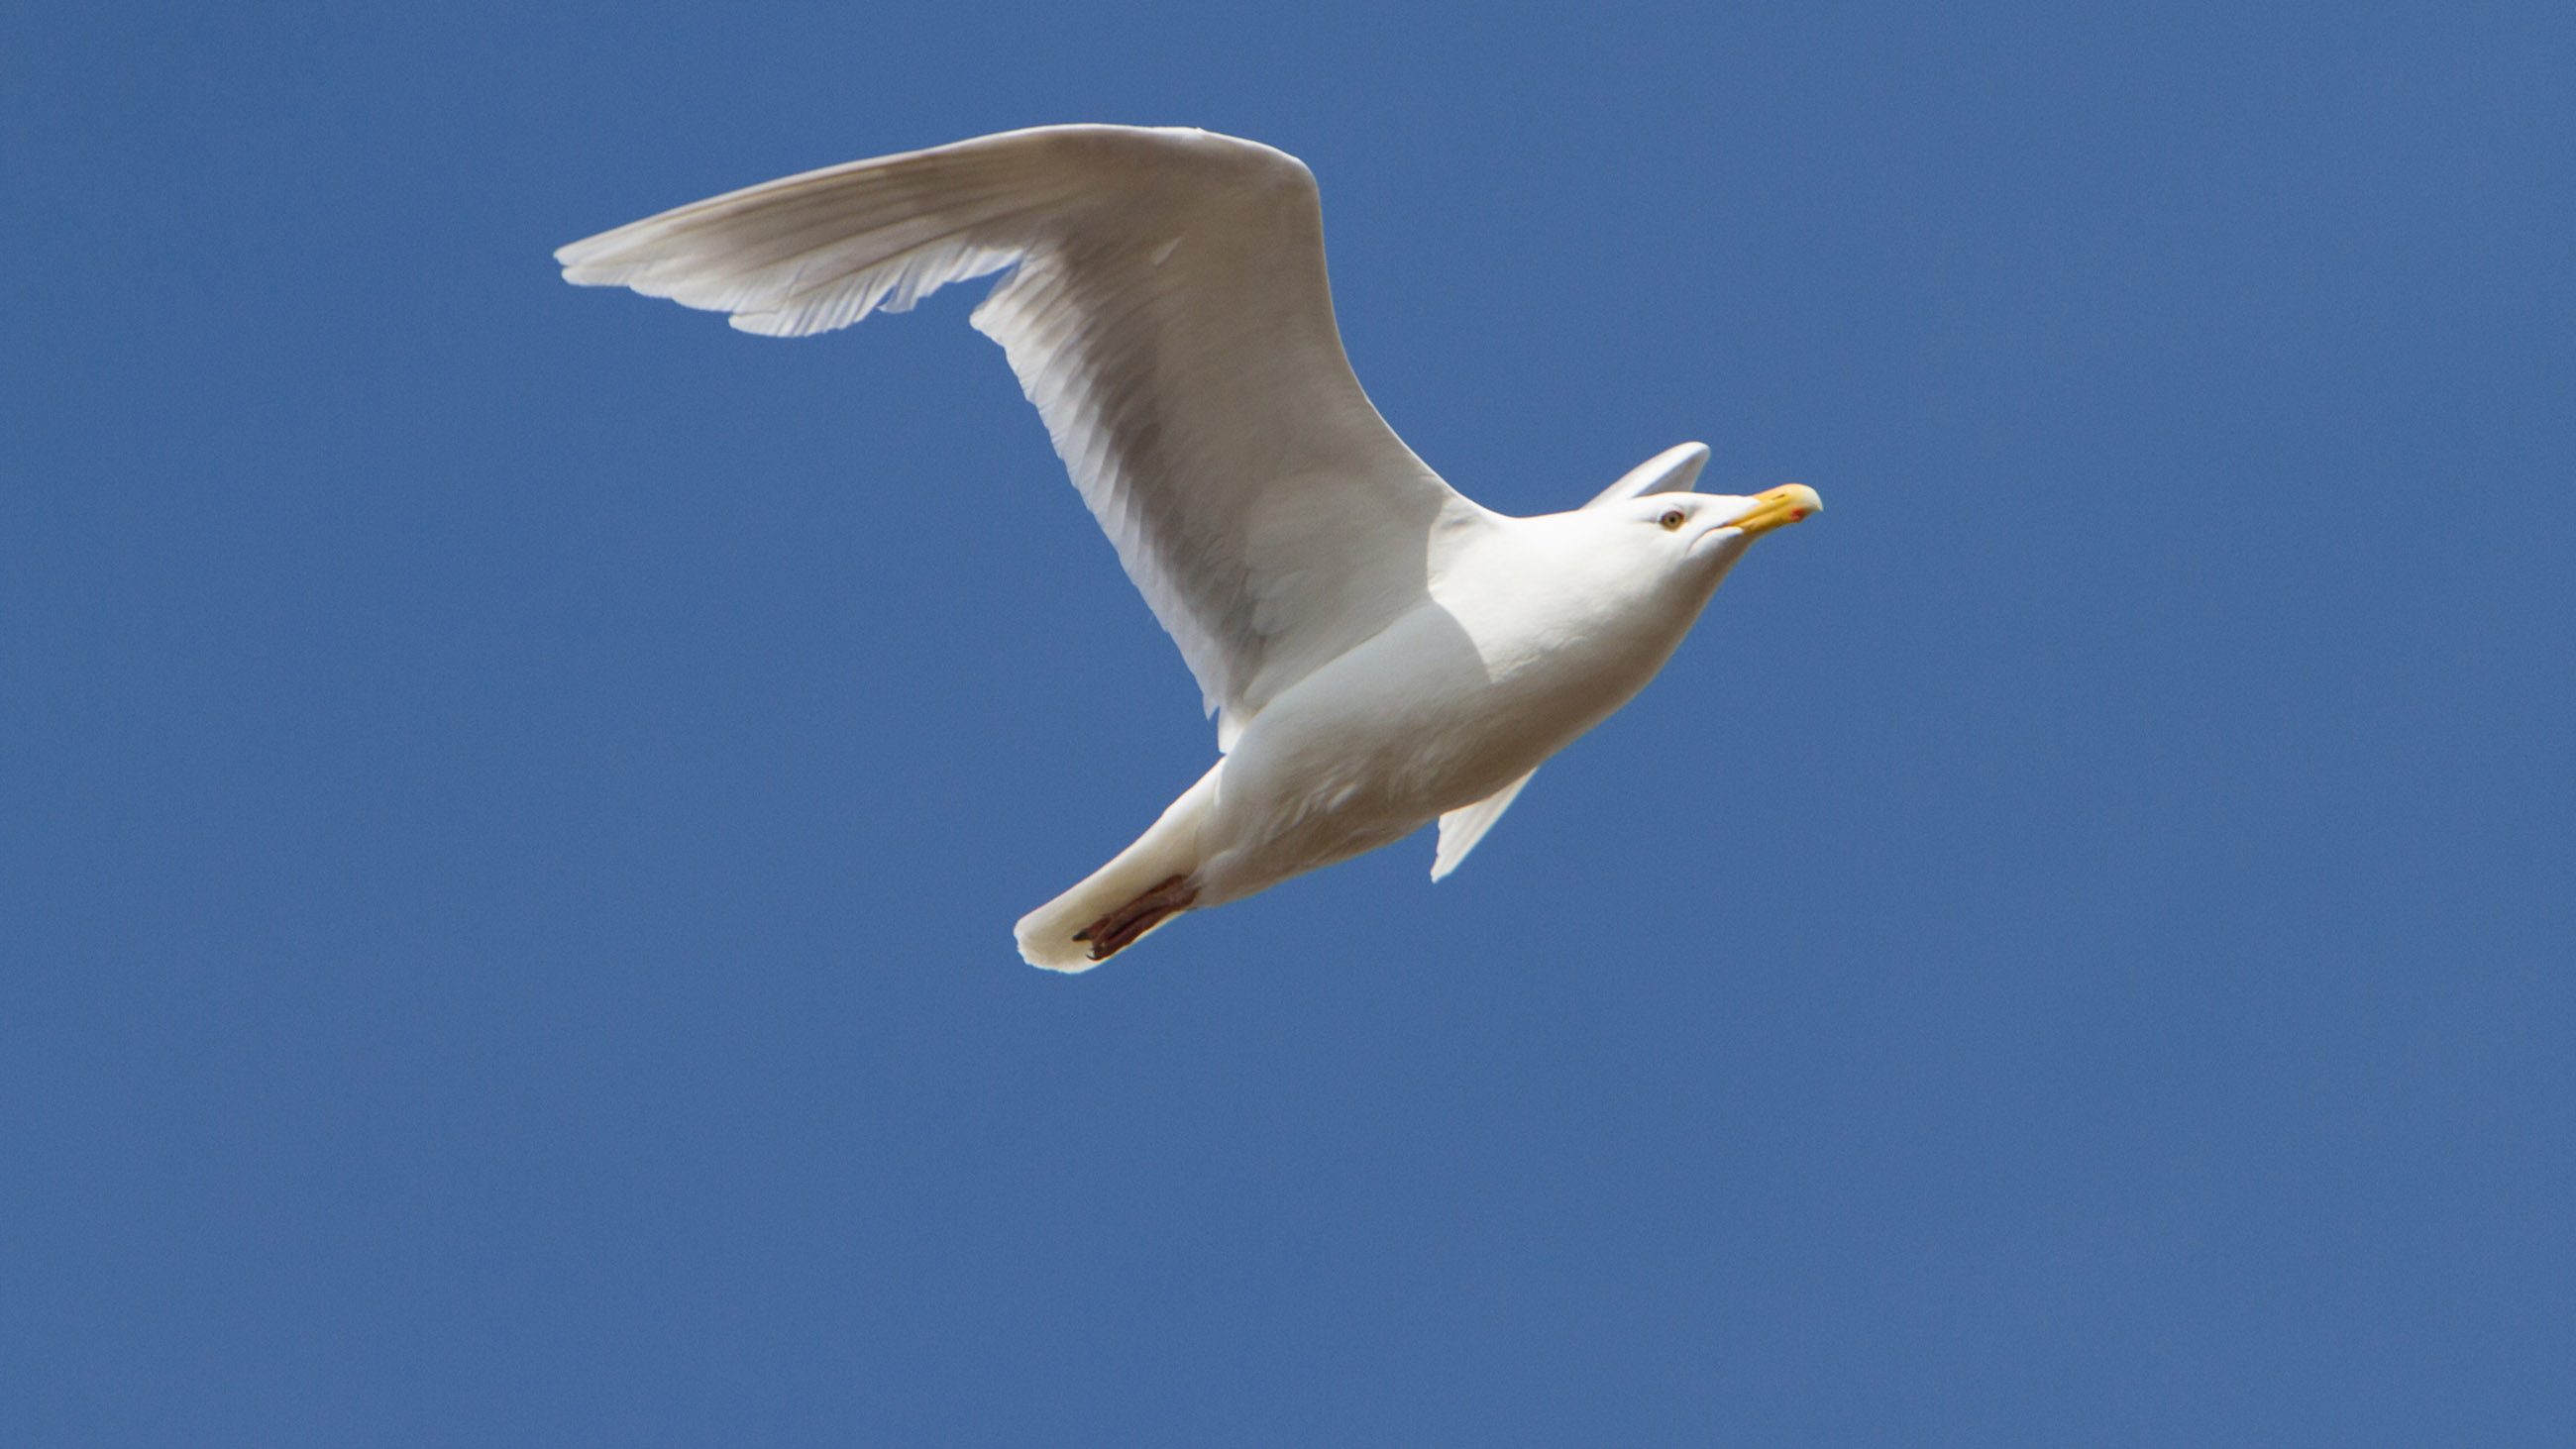 A glaucous gull takes flight in Alaska’s Arctic. As ocean's warm, the bird's traditional prey fish are disappearing.